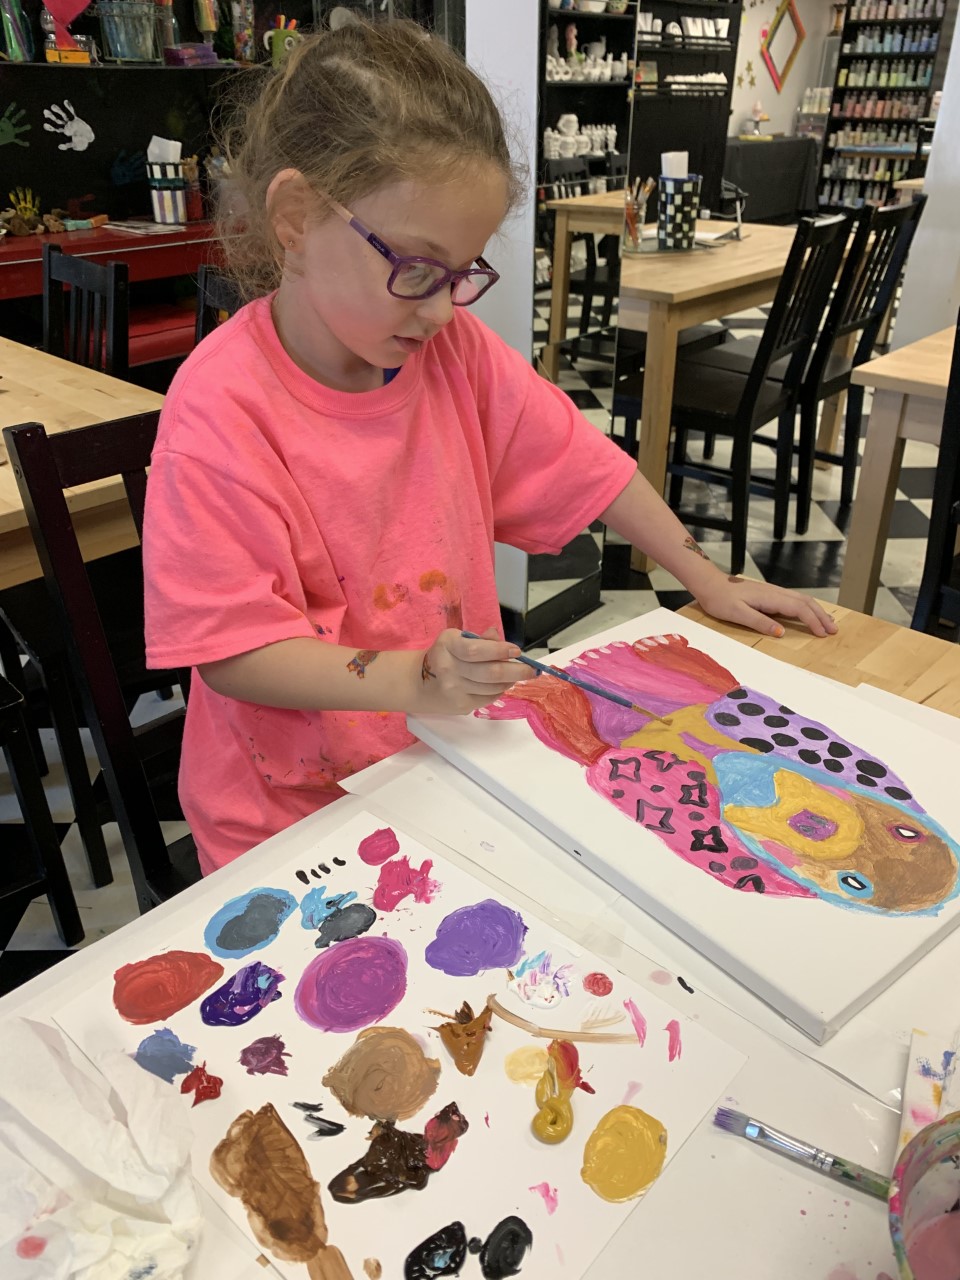 Kid enthusiastically participating in a mosaic art class